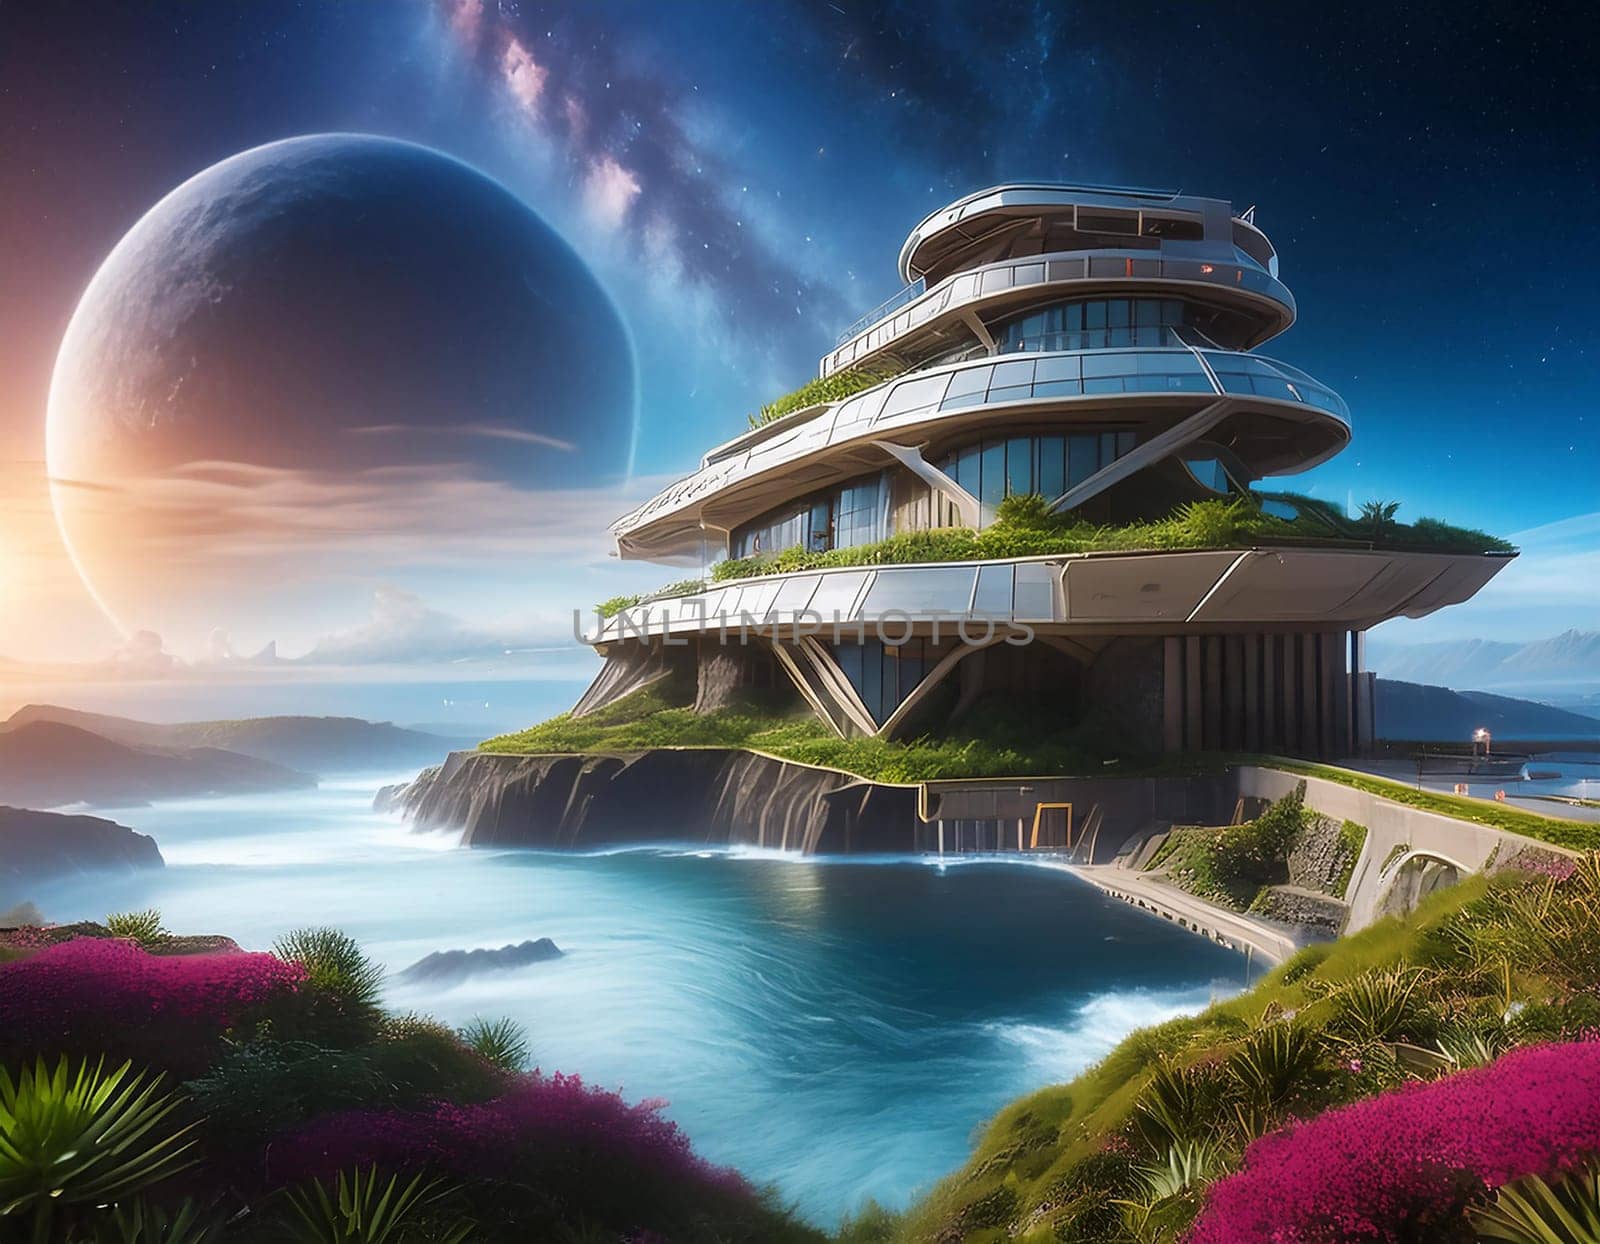 Fantasy image of a distant planet where a engineering building resides near a coast with the Milky Way Galaxy in the sky.